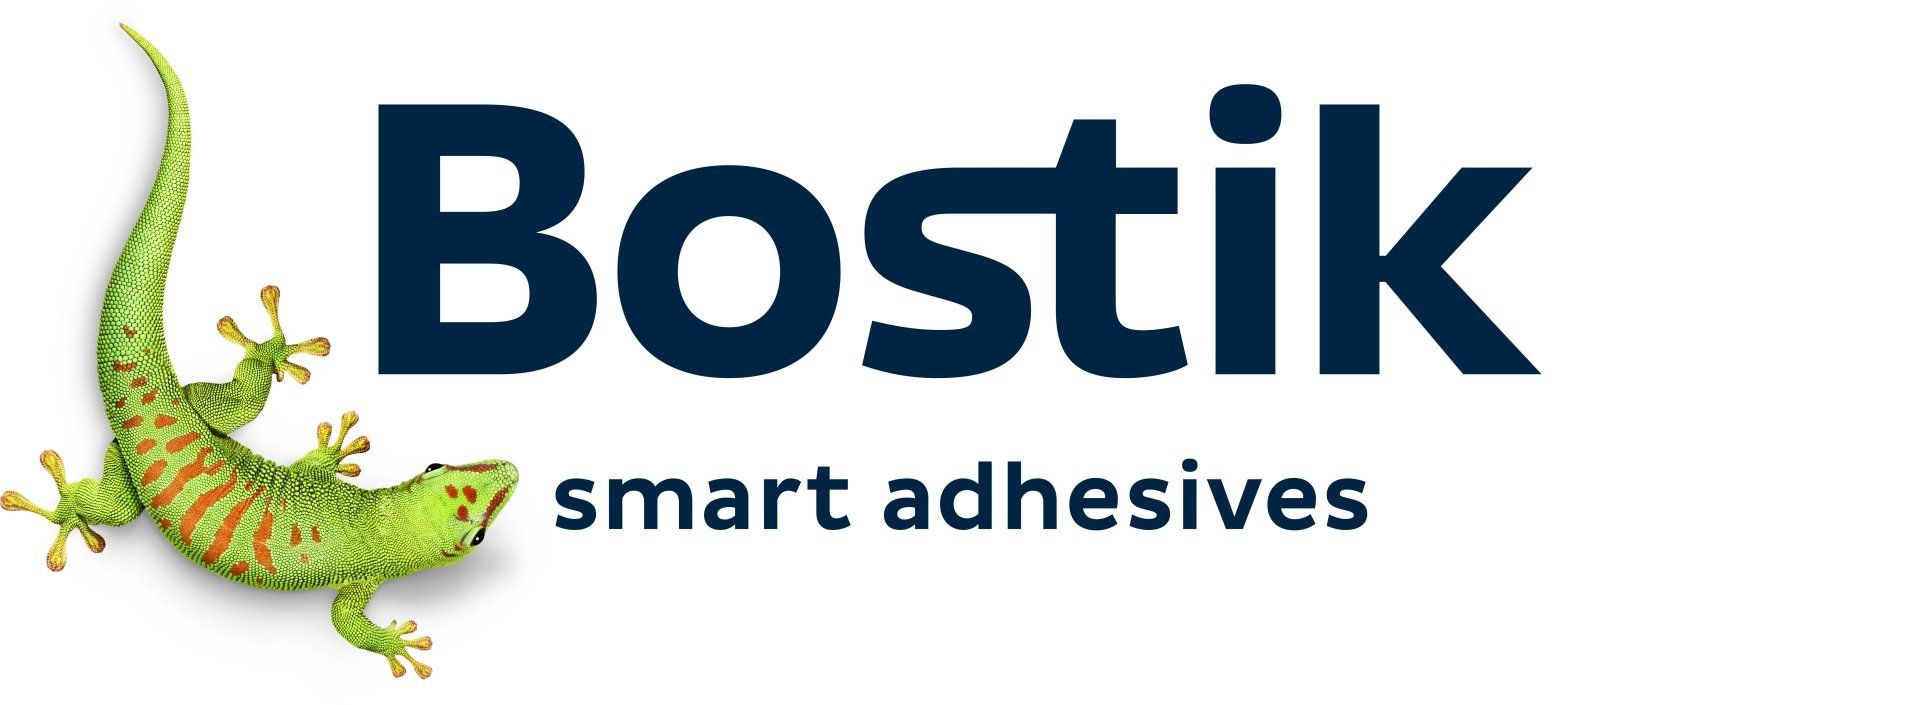 The logo for bostik smart adhesives has a lizard on it